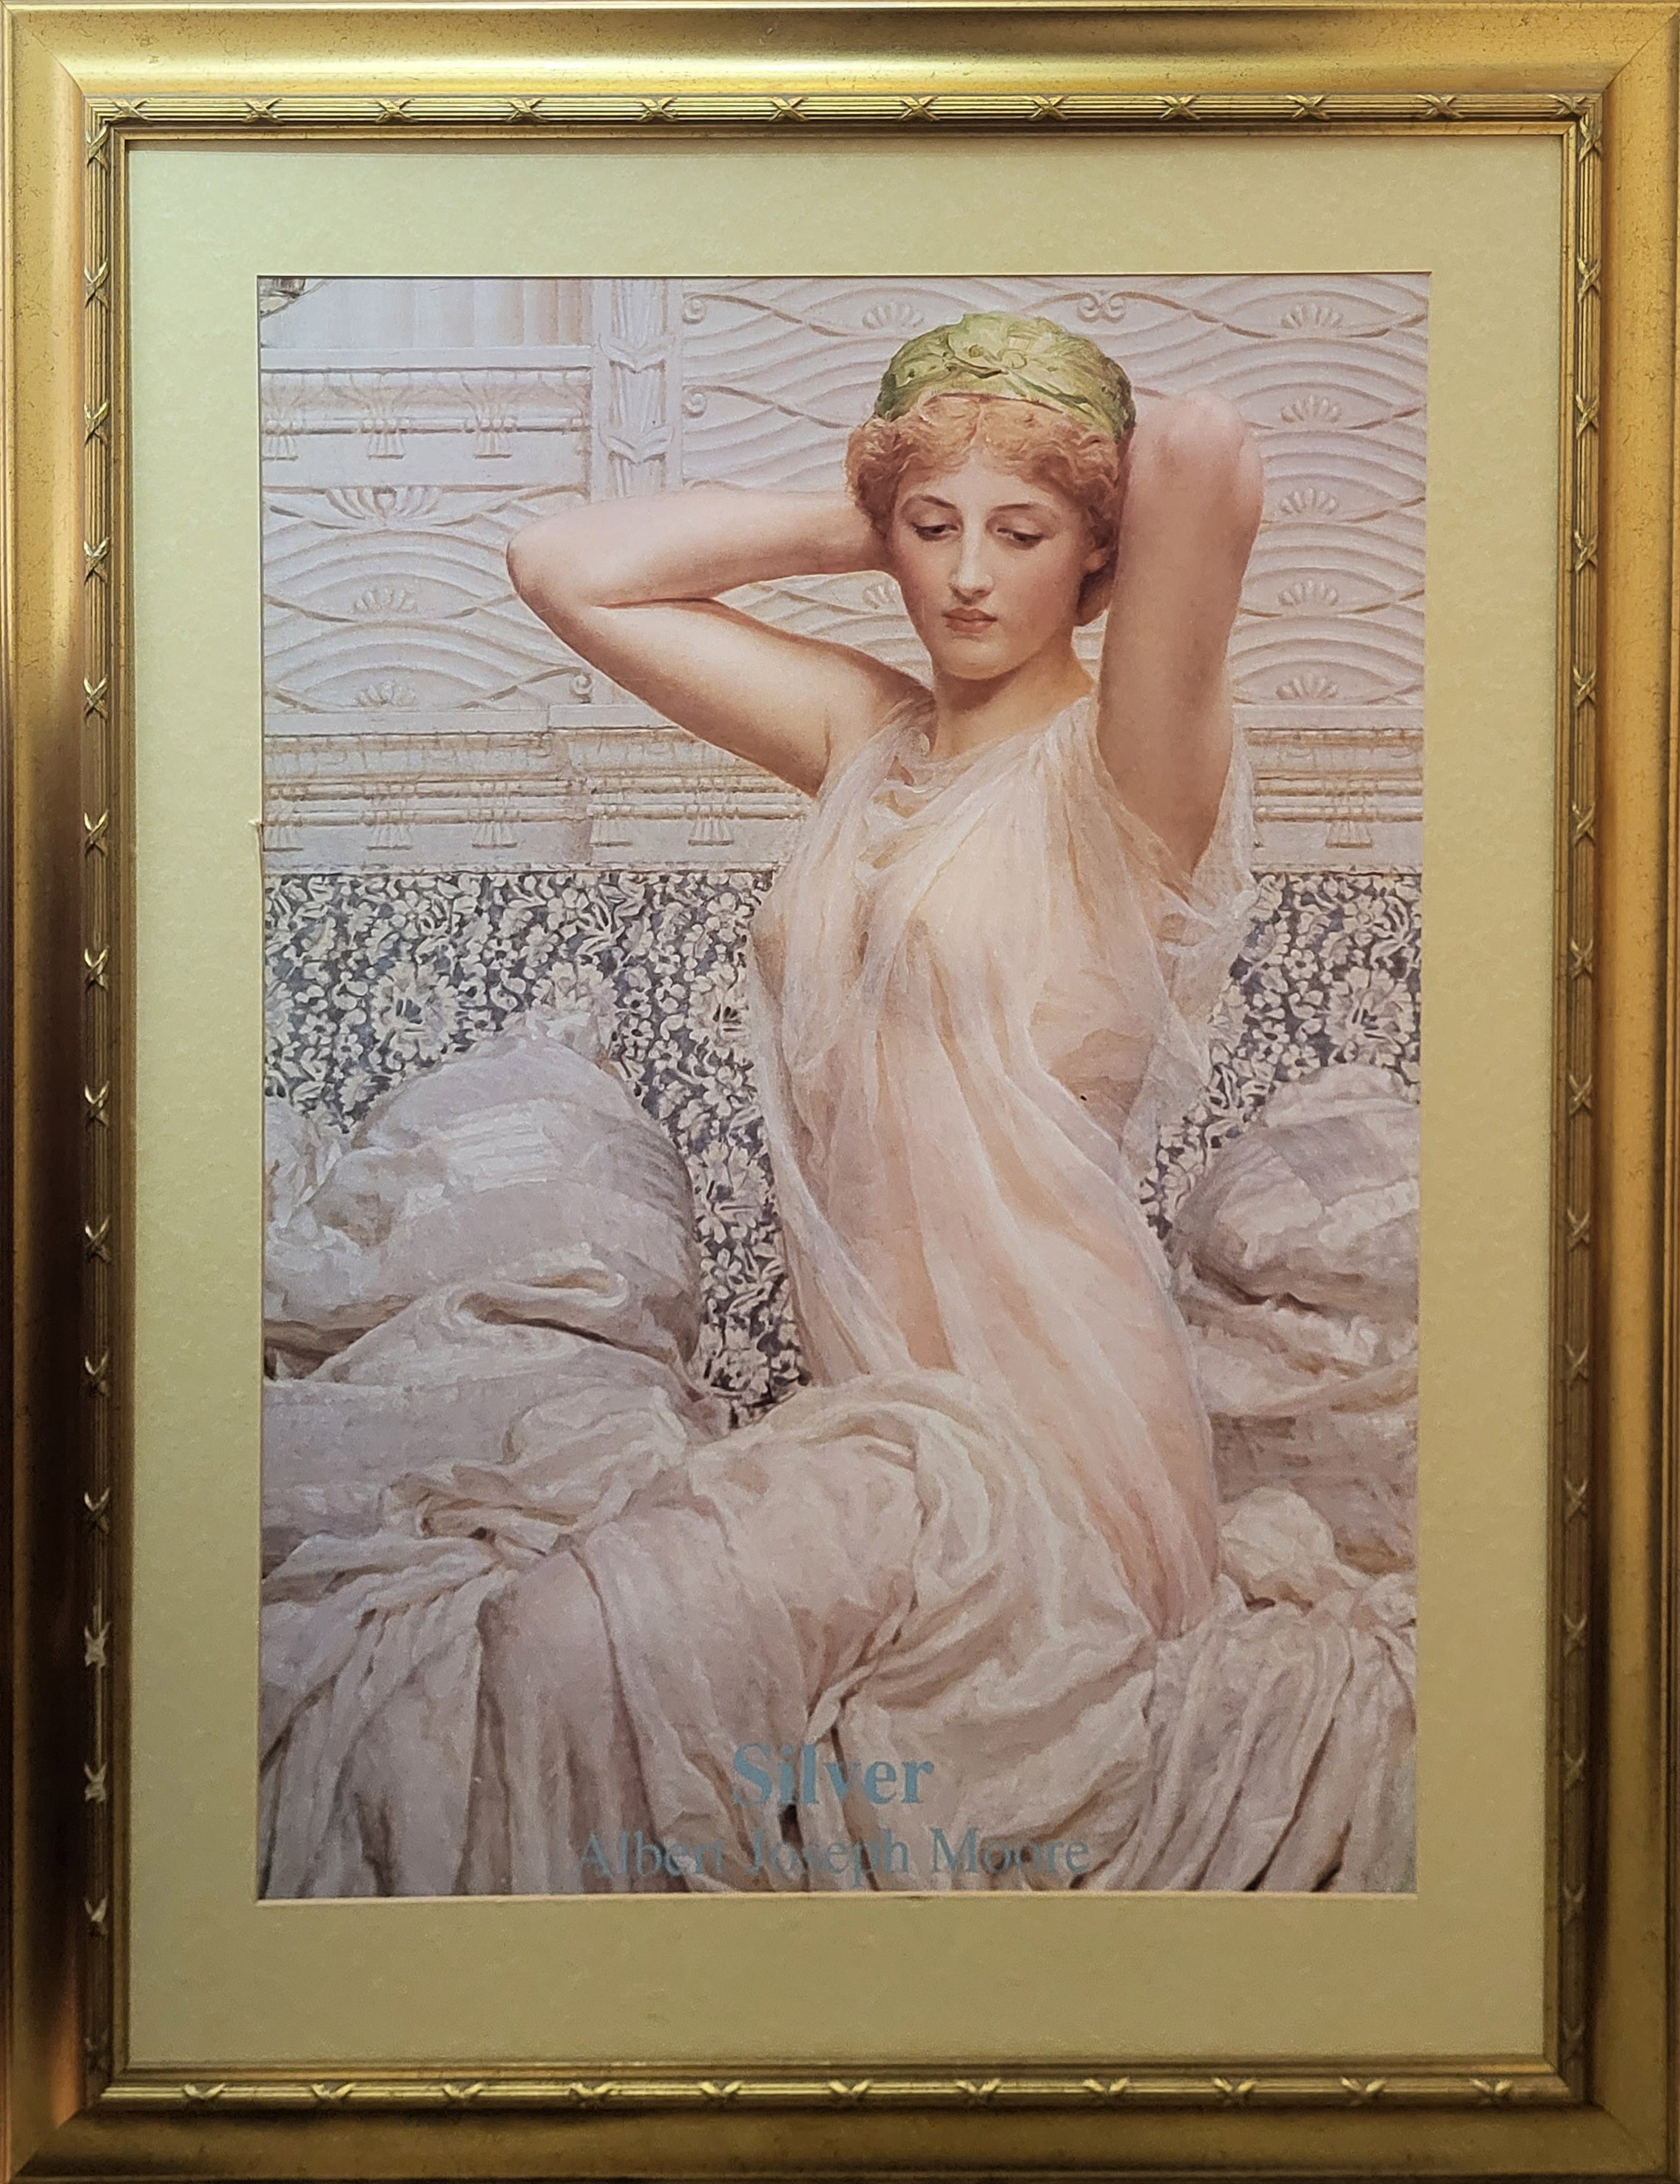 AFTER ALBERT JOSEPH MOORE, 1841 - 1893, TWO LARGE PORTRAIT PRINTS Titled 'Silver' and 'Dreamers', in